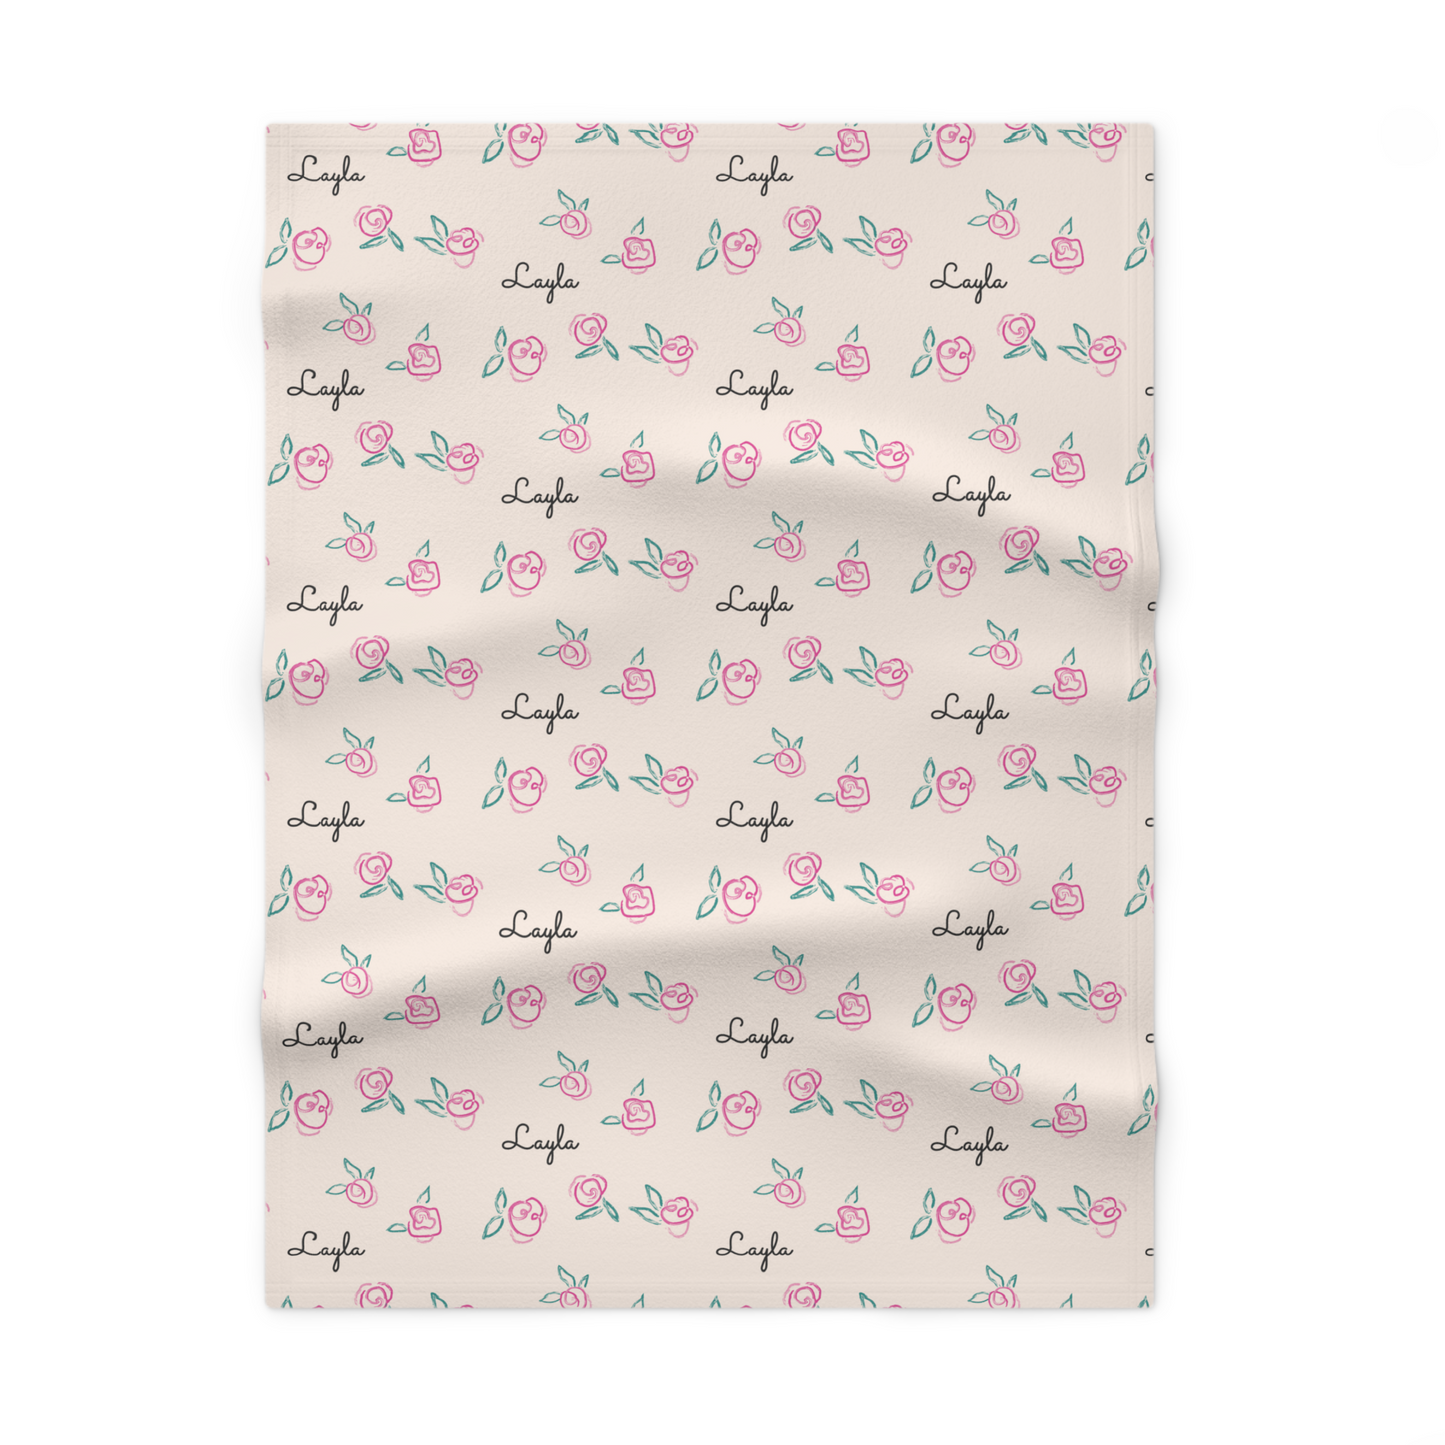 Fleece personalized baby blanket in pink rose with green leaves pattern laid flat